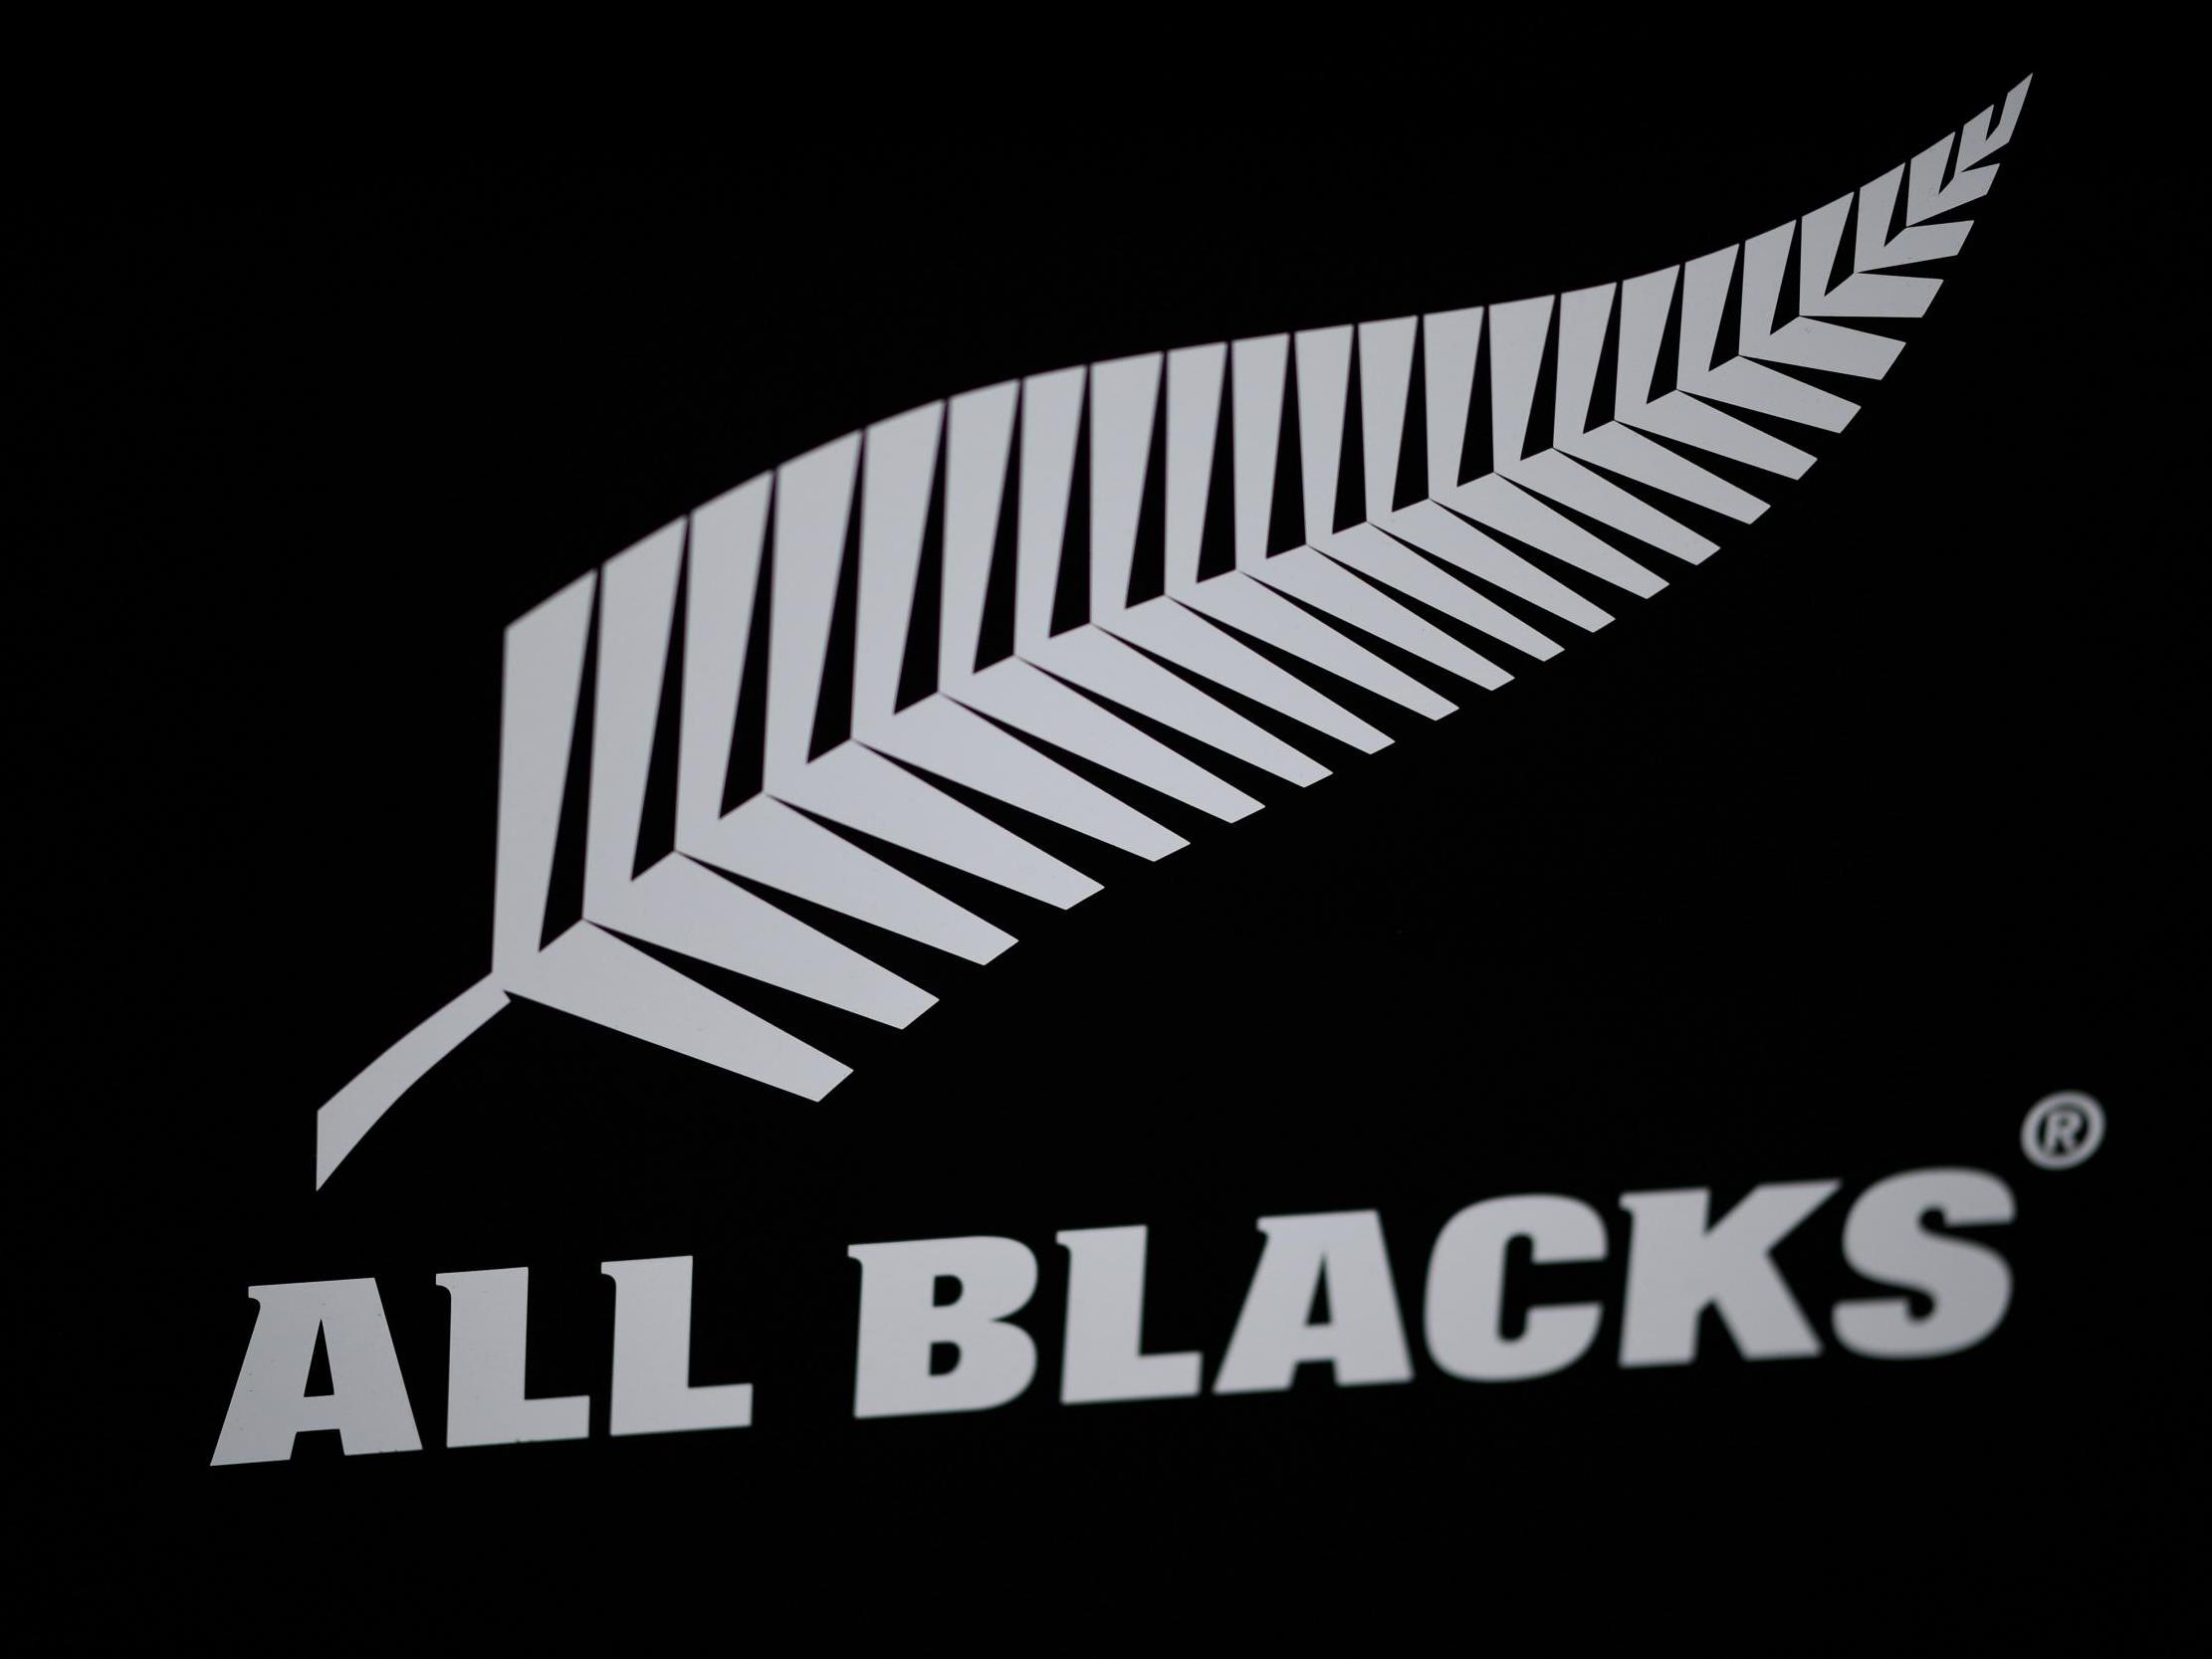 New Zealand back row Luke Jacobson was ruled out of the 2019 Rugby World Cup with concussion